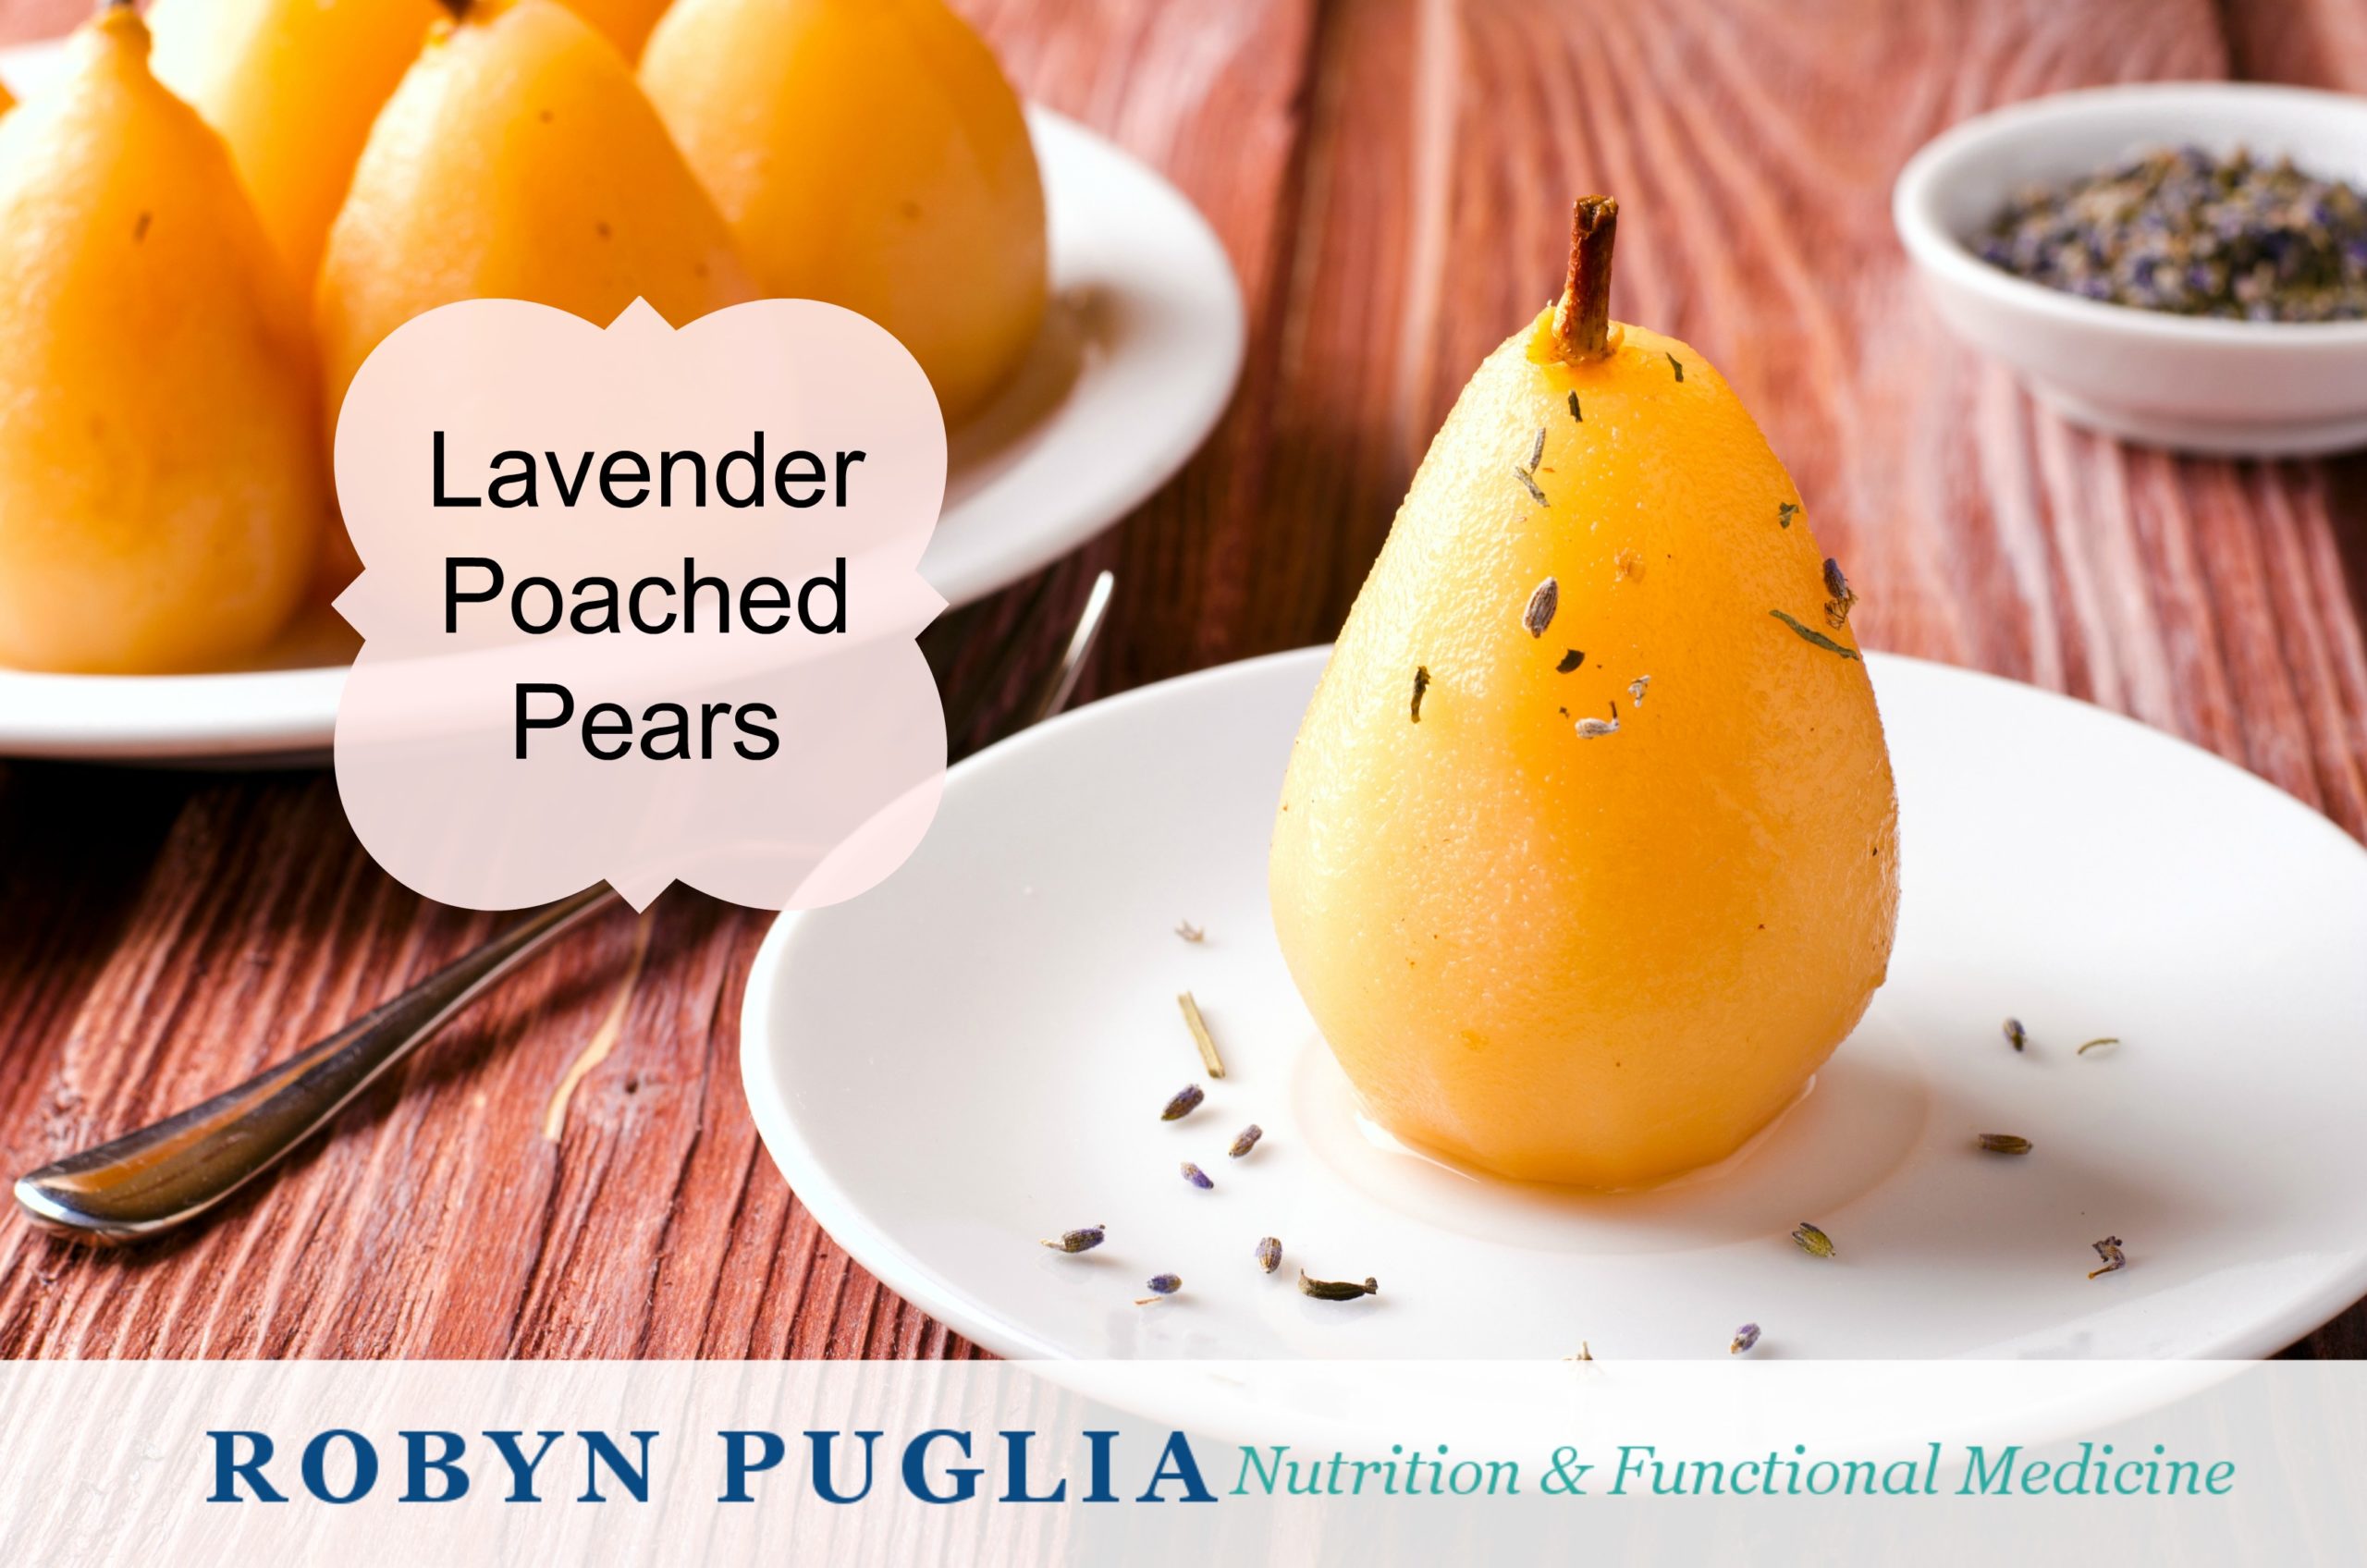 Lavender Poached Pears